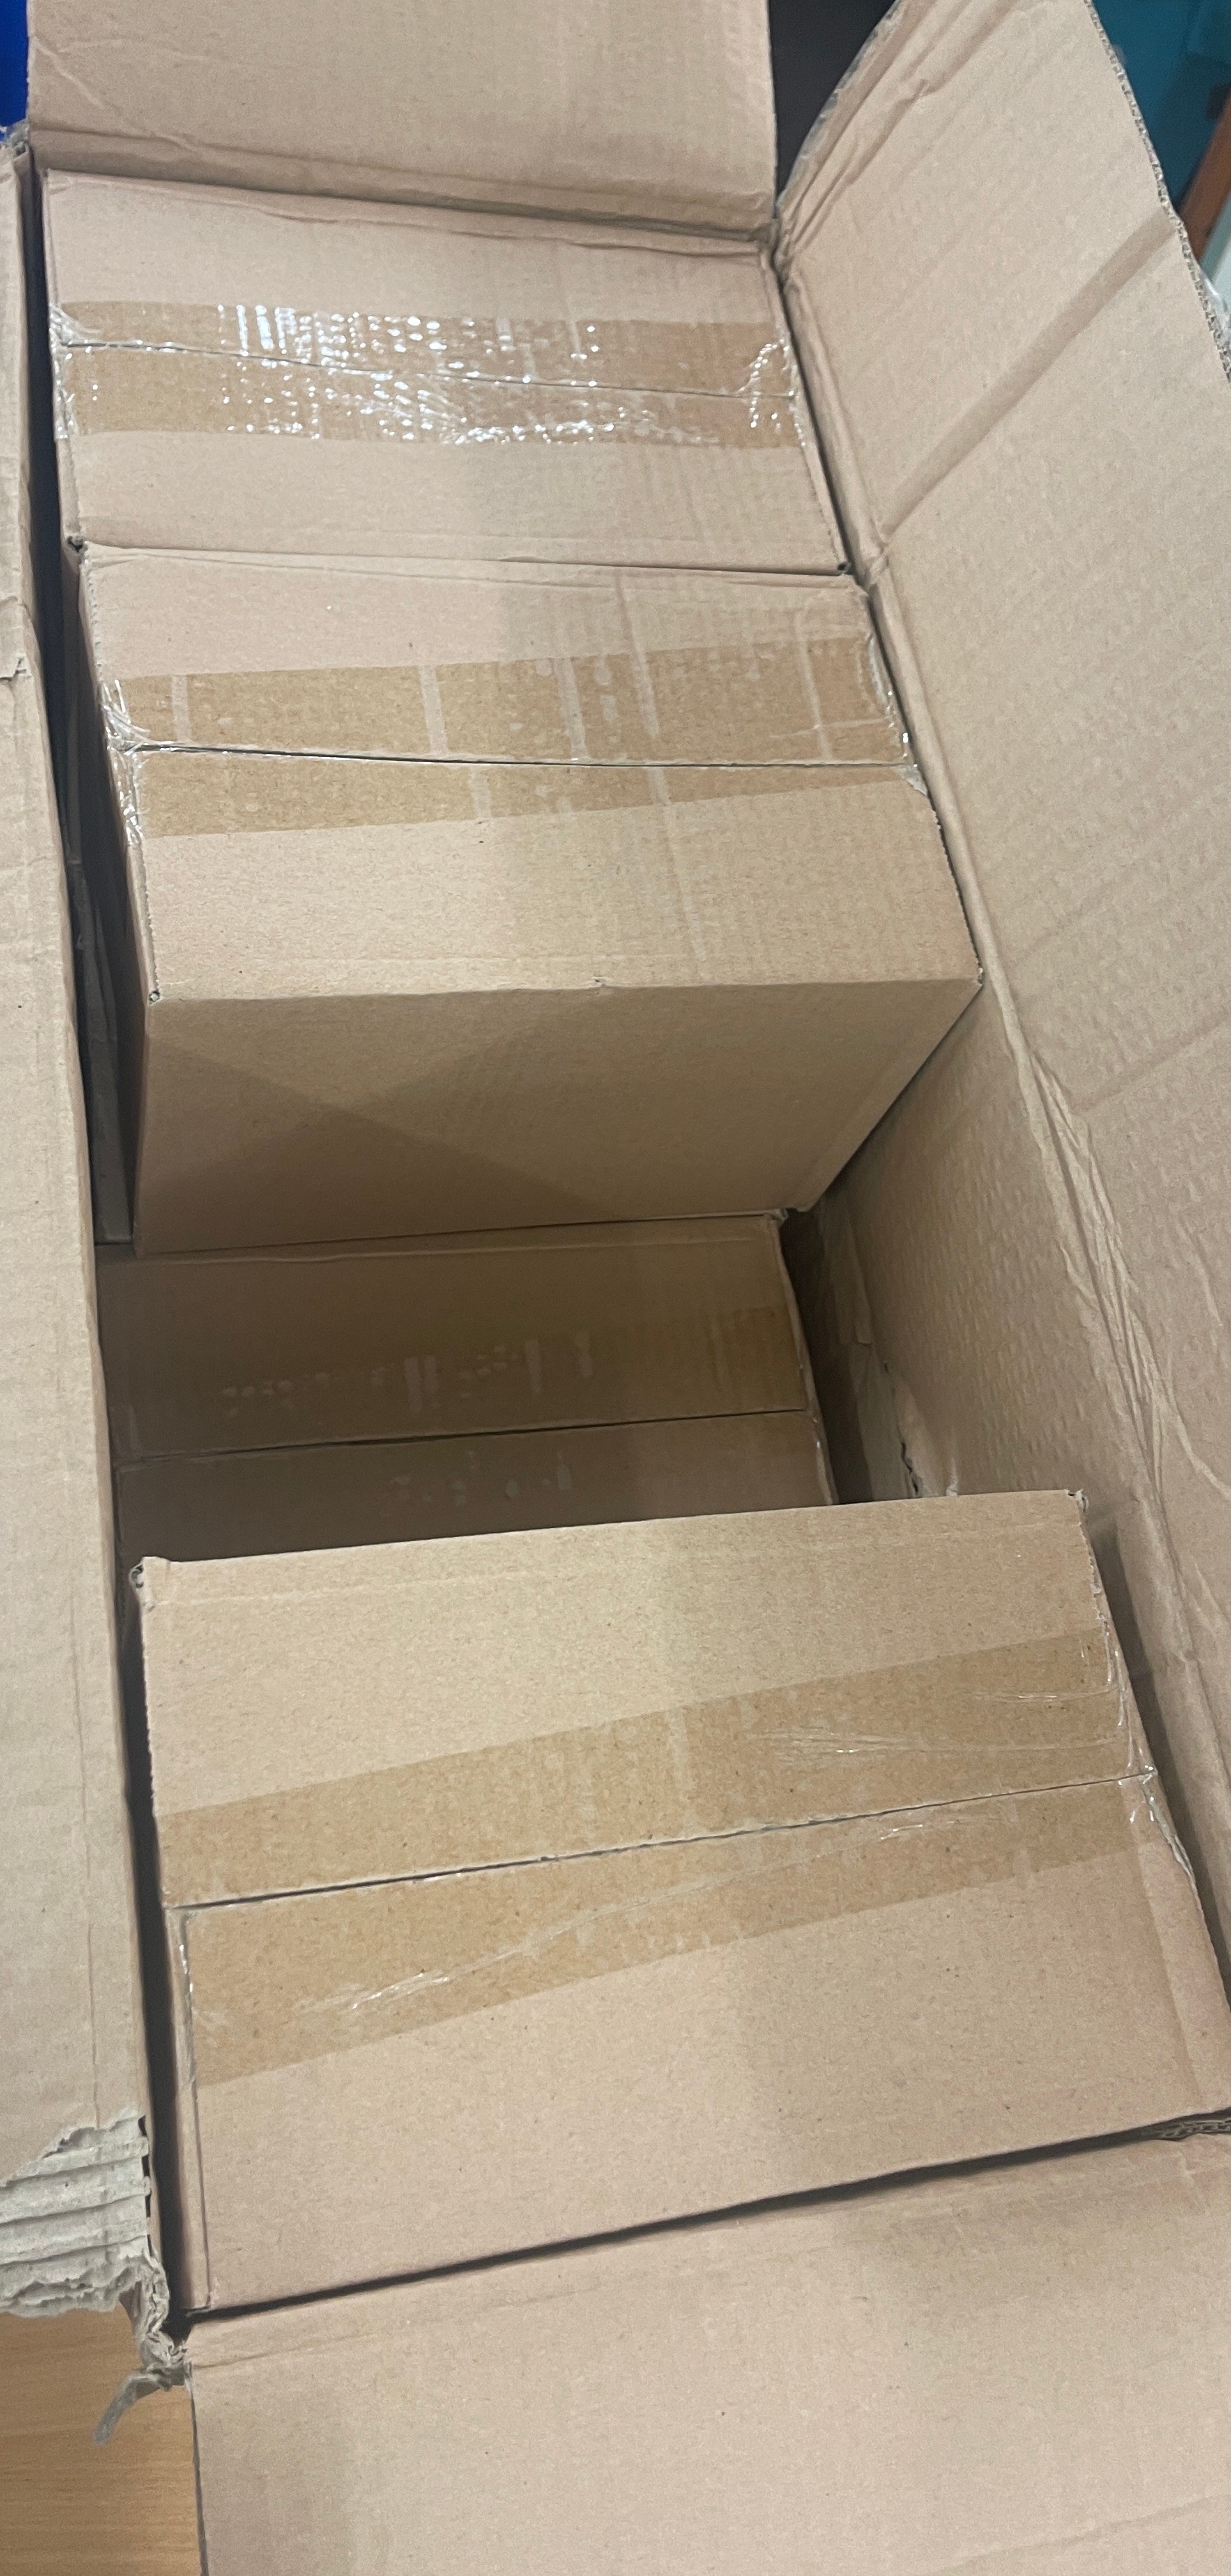 8 boxes each box containing 5 Purple Phoenix IV Universal cases Ipad mini / tablet 7 inches - Image 3 of 3